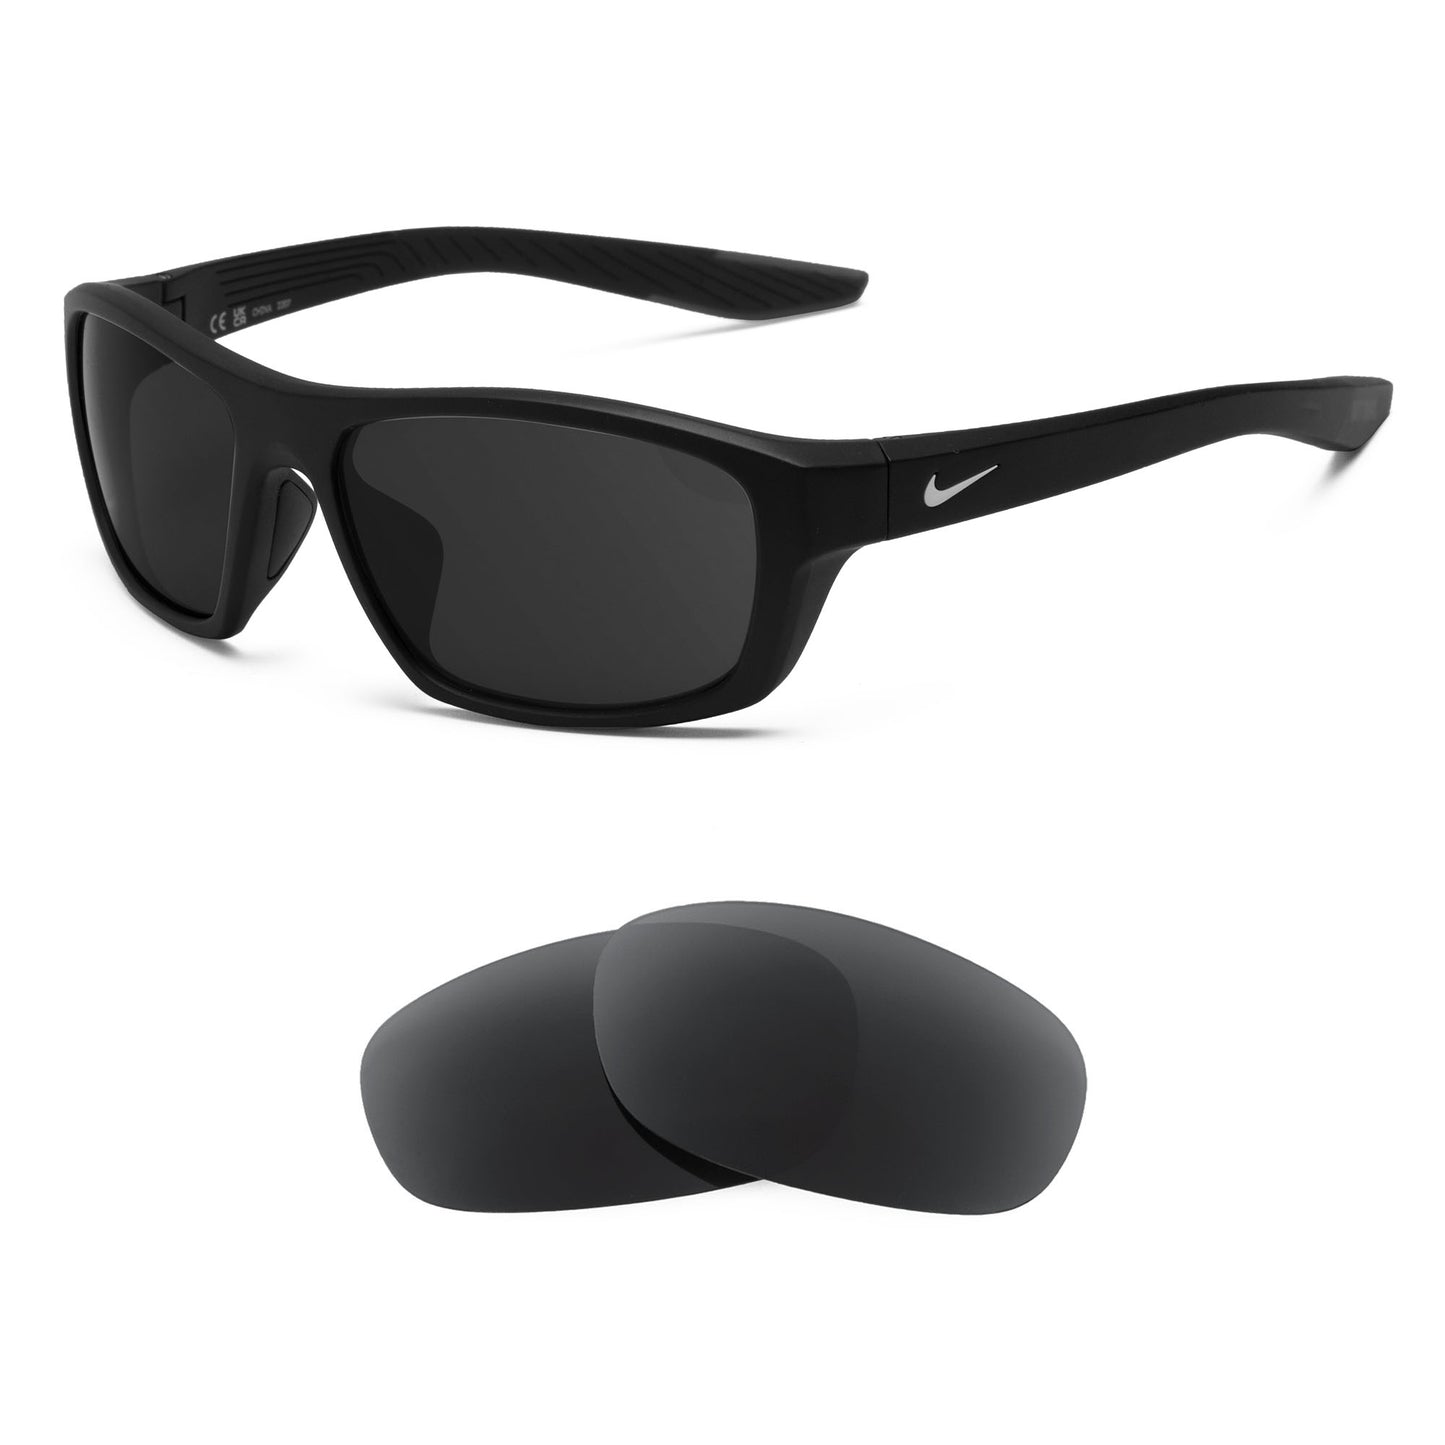 Nike Brazen Boost sunglasses with replacement lenses